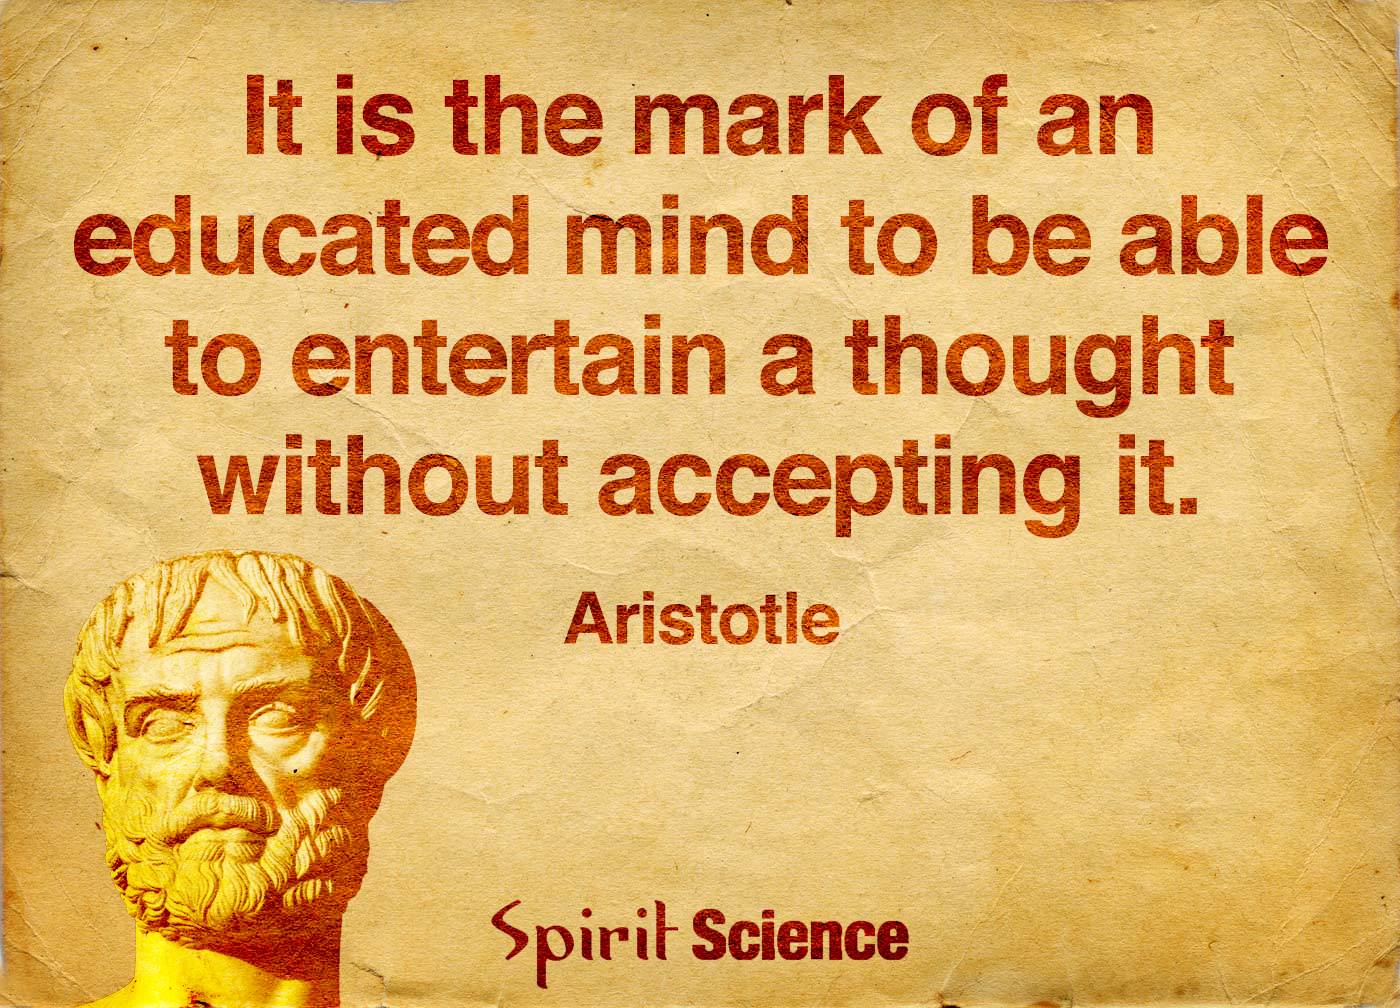 it is the mark of an educate mind to be able to entertain a thought without accepting it, aristotle